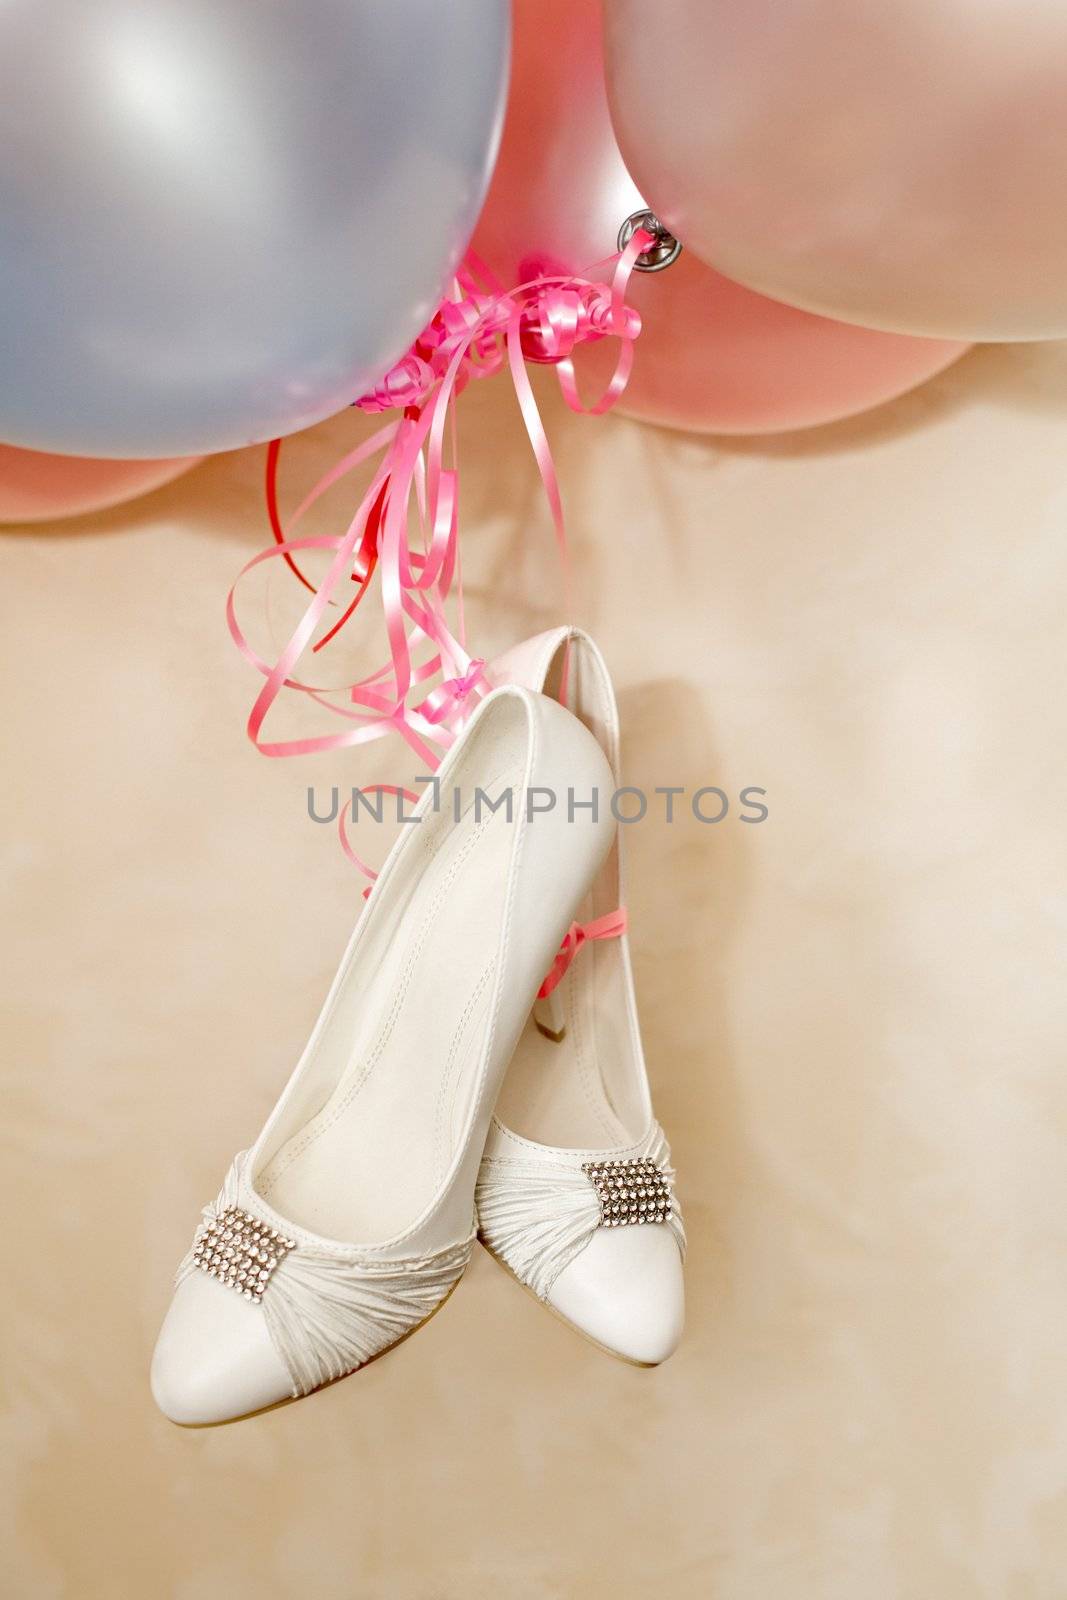 Bride shoes and balloons by mdmmikle